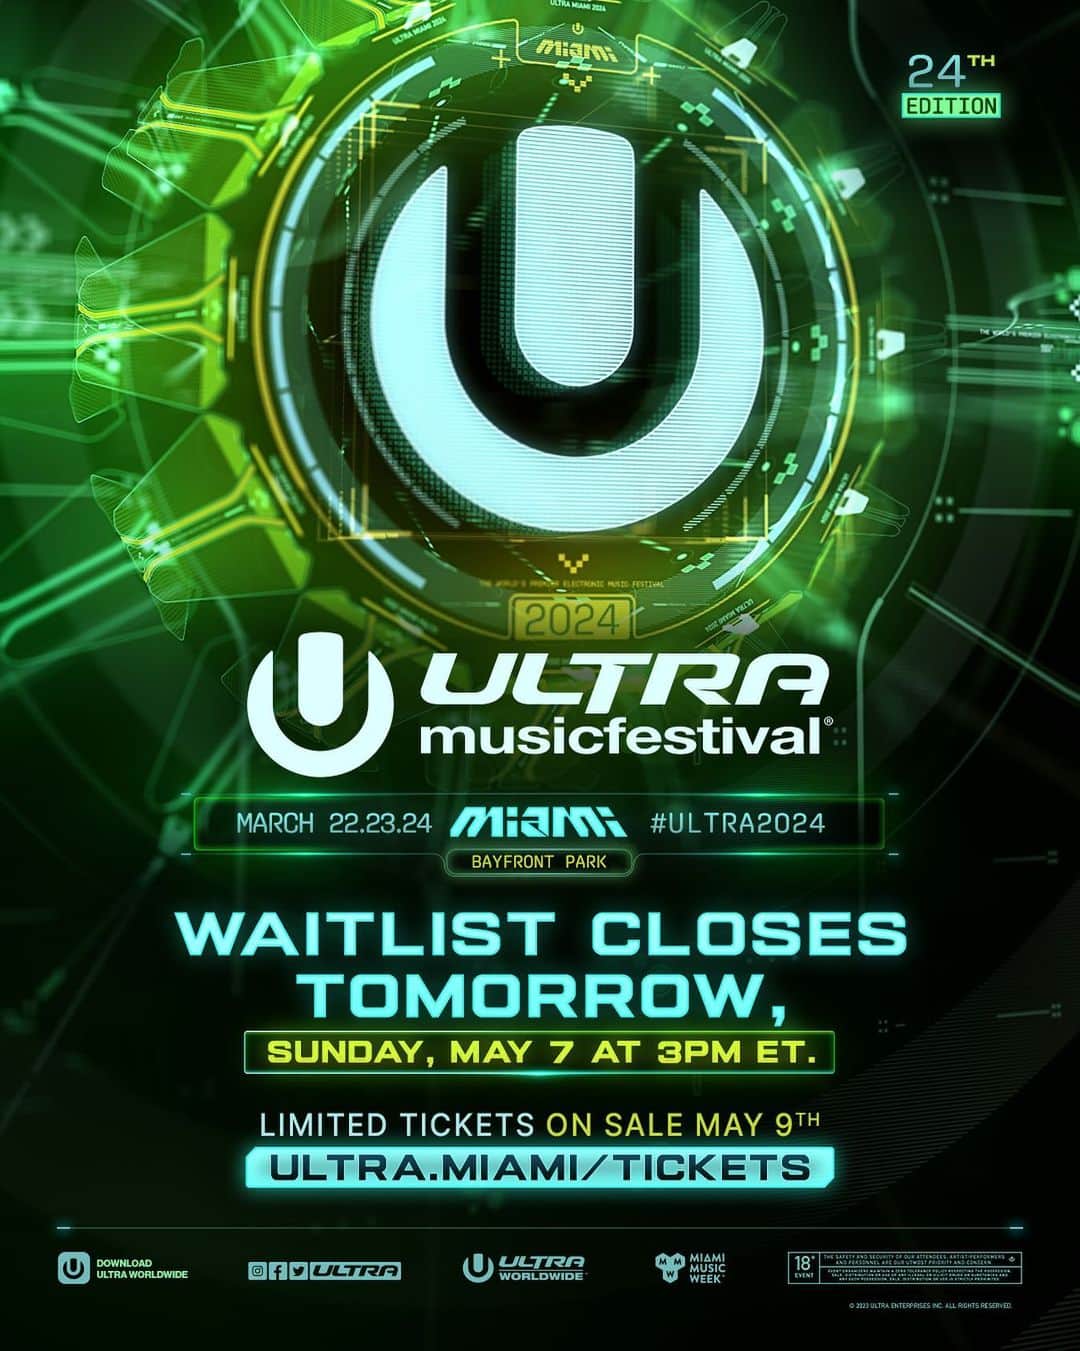 Ultra Music Festivalのインスタグラム：「The Waitlist for #Ultra2024 closes tomorrow at 3PM ET and Limited tickets will go on sale Tuesday, May 9!  Join the Waitlist ➡️ ultra.miami/tickets」